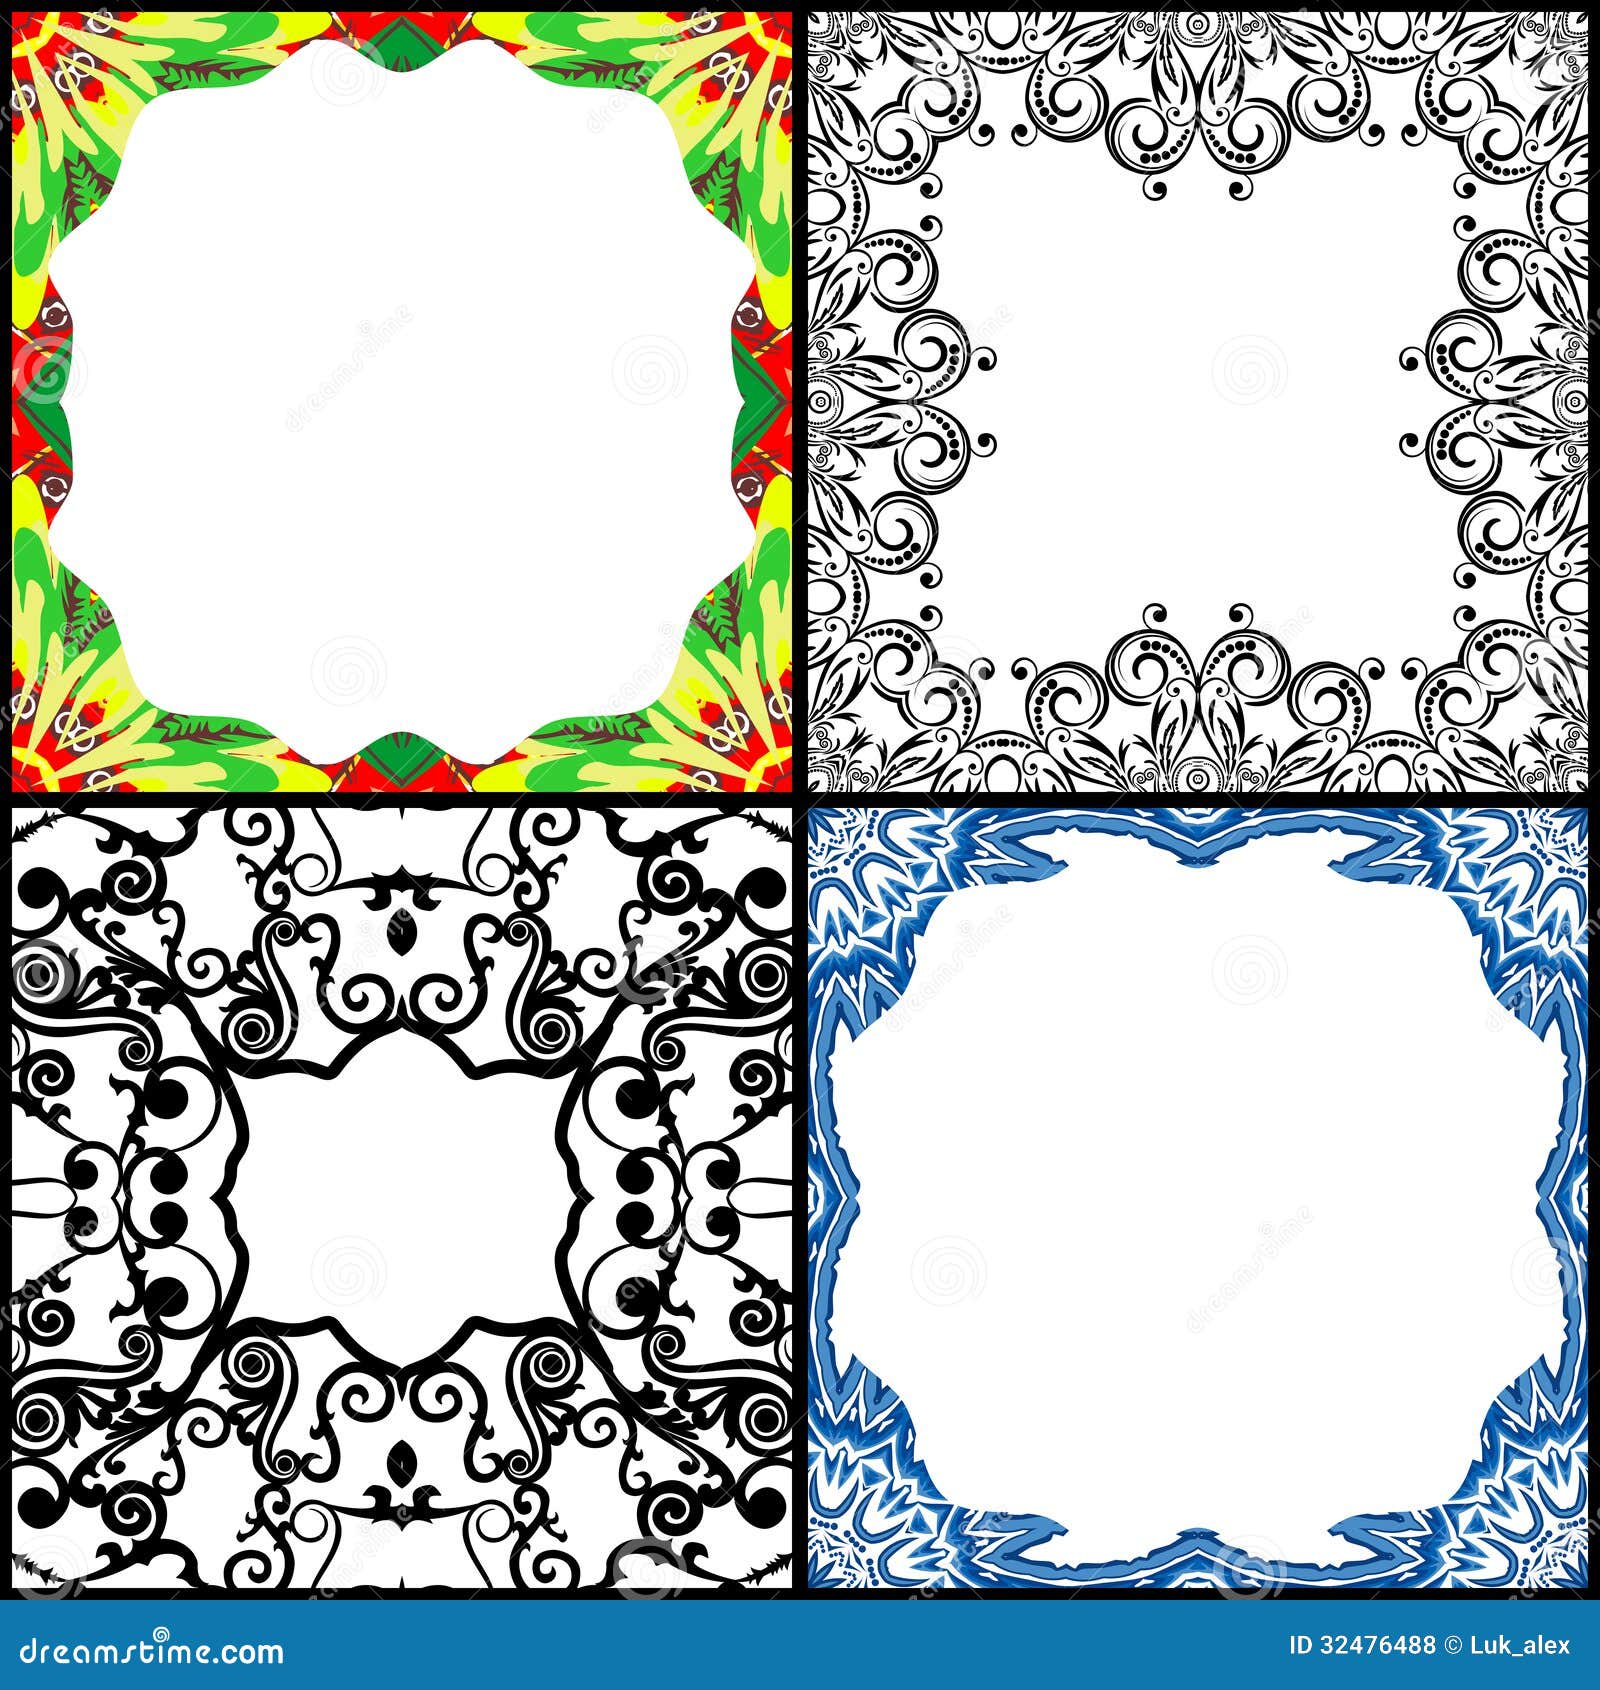 clipart design ultimate ornaments collection - photo #24